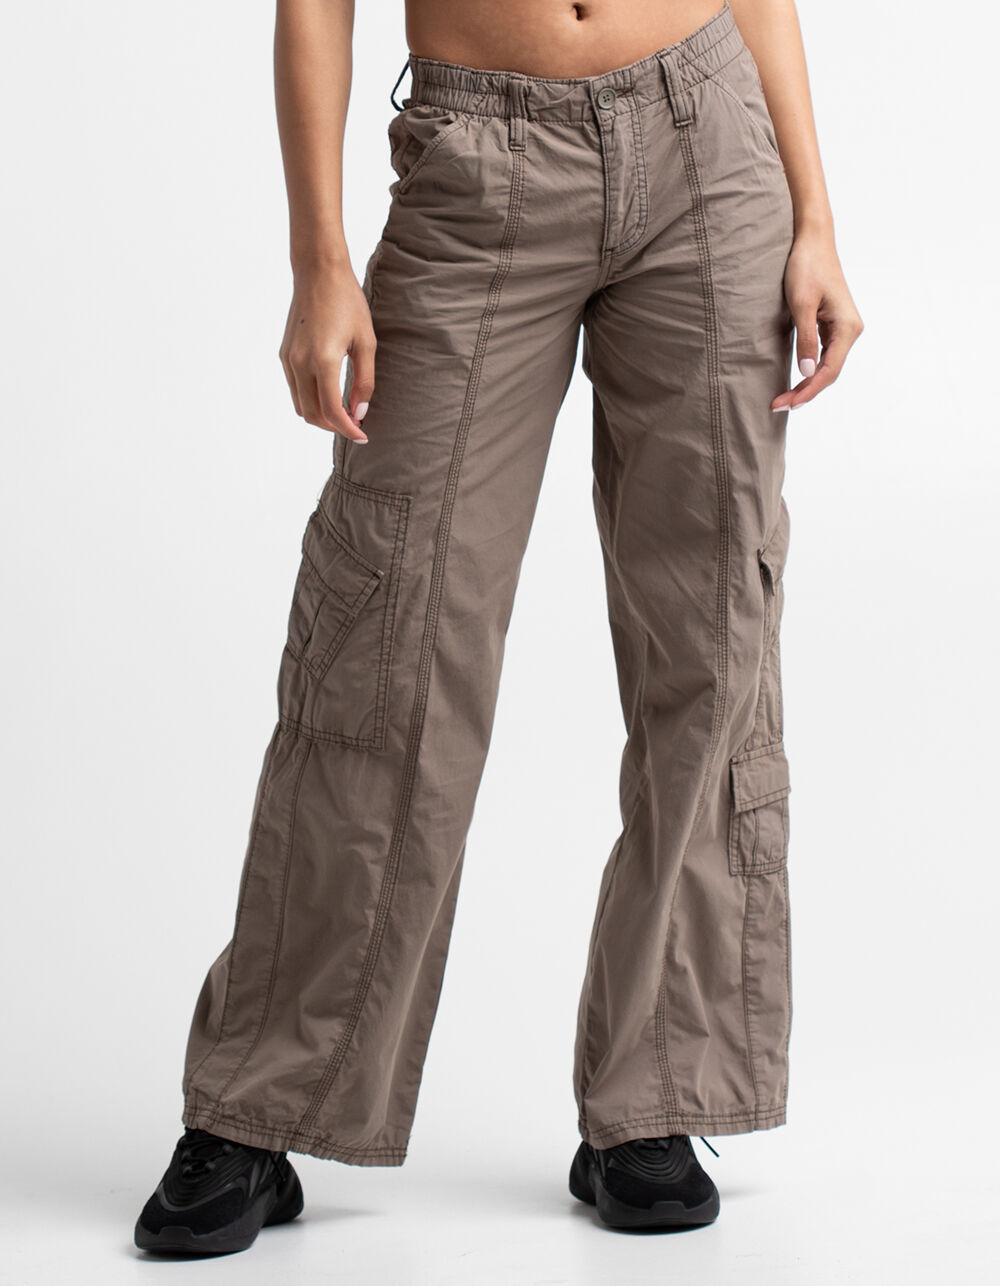 urban outfitters Y2K cargo pants late90s